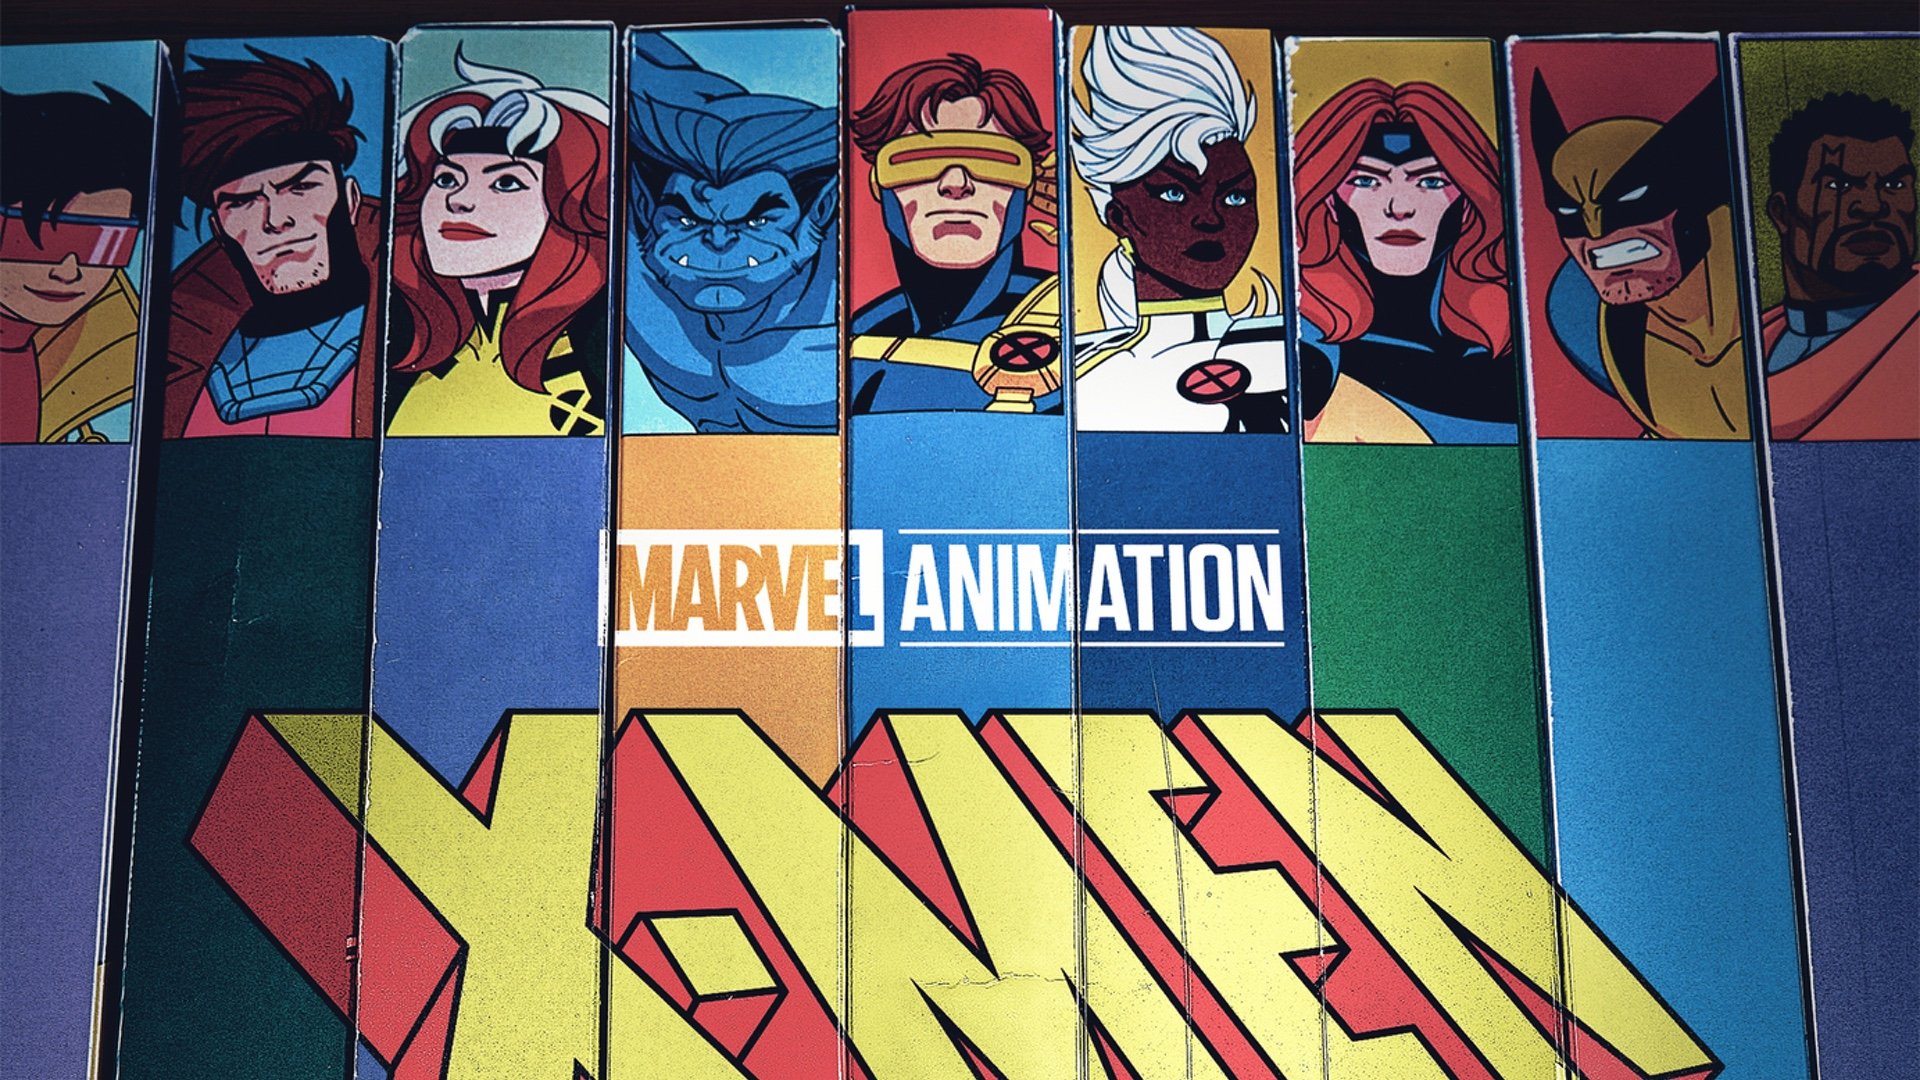 Fun Poster Art For Marvel Animation's X